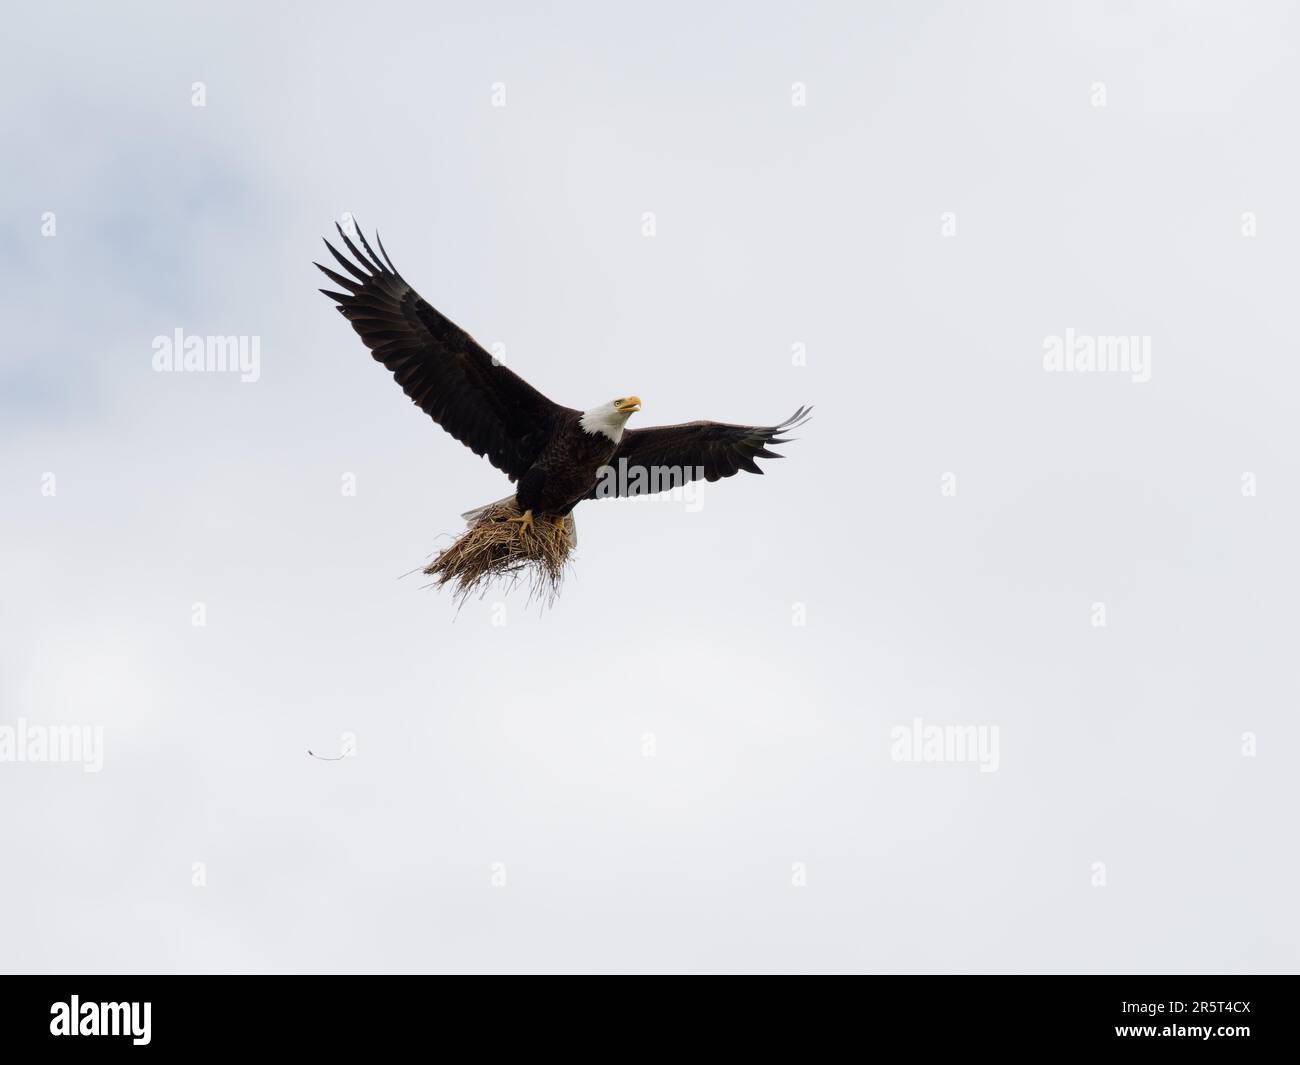 A majestic bald eagle soaring through the sky, its strong talons clutching a small nest in its grasp Stock Photo